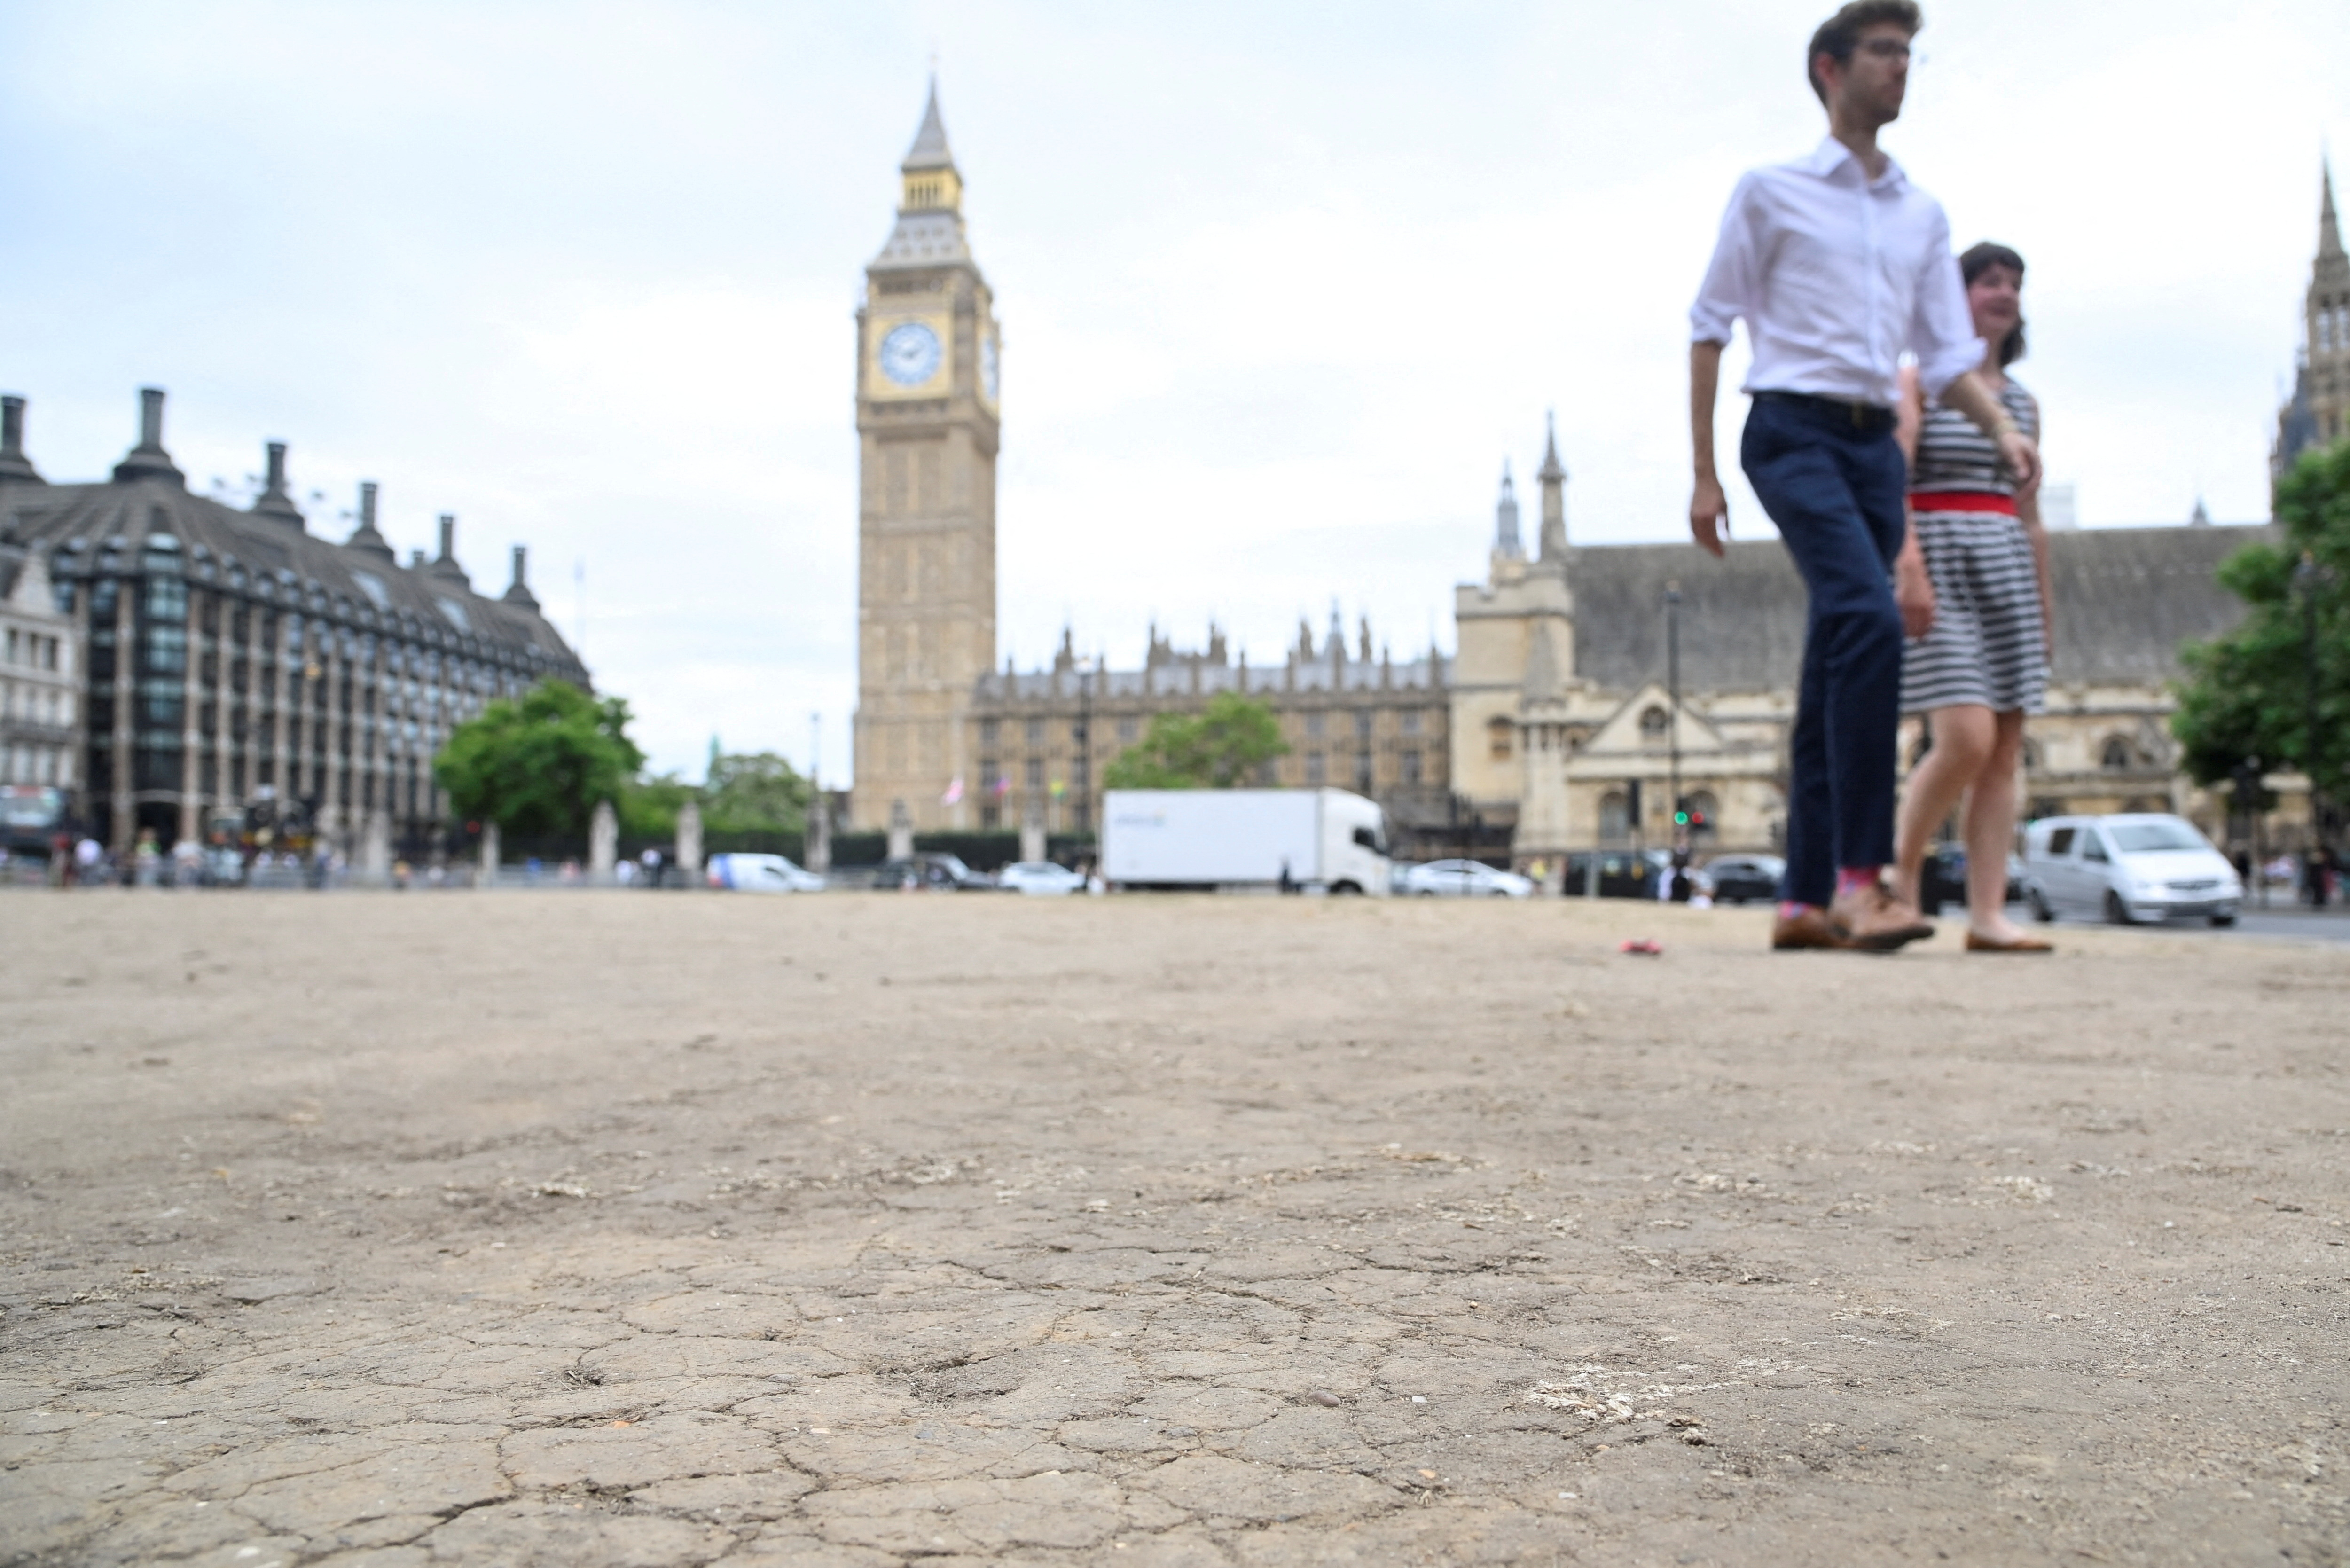 Cracked earth is seen as hot weather continues, in Parliament Square, London